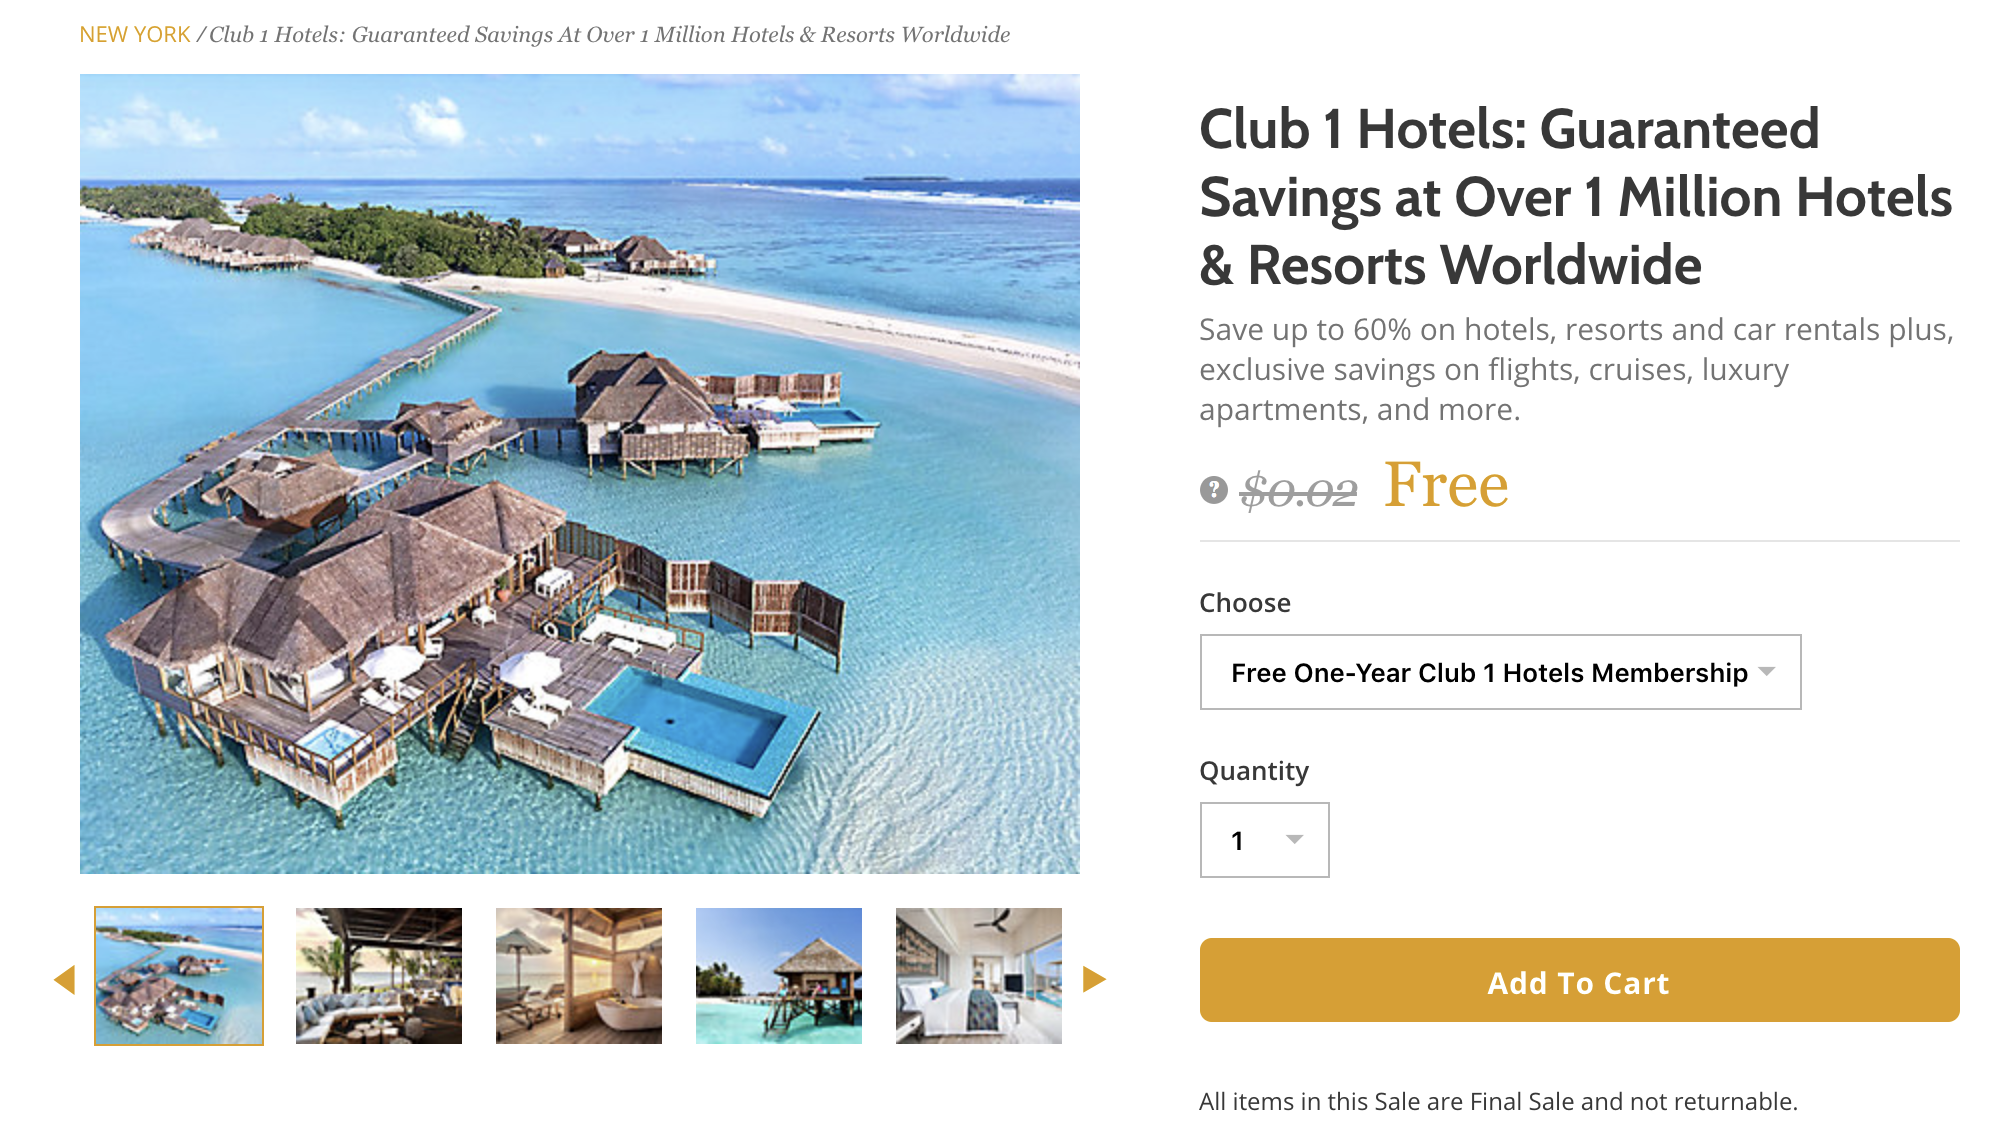 Club 1 Hotels Offers Free and Discounted Membership